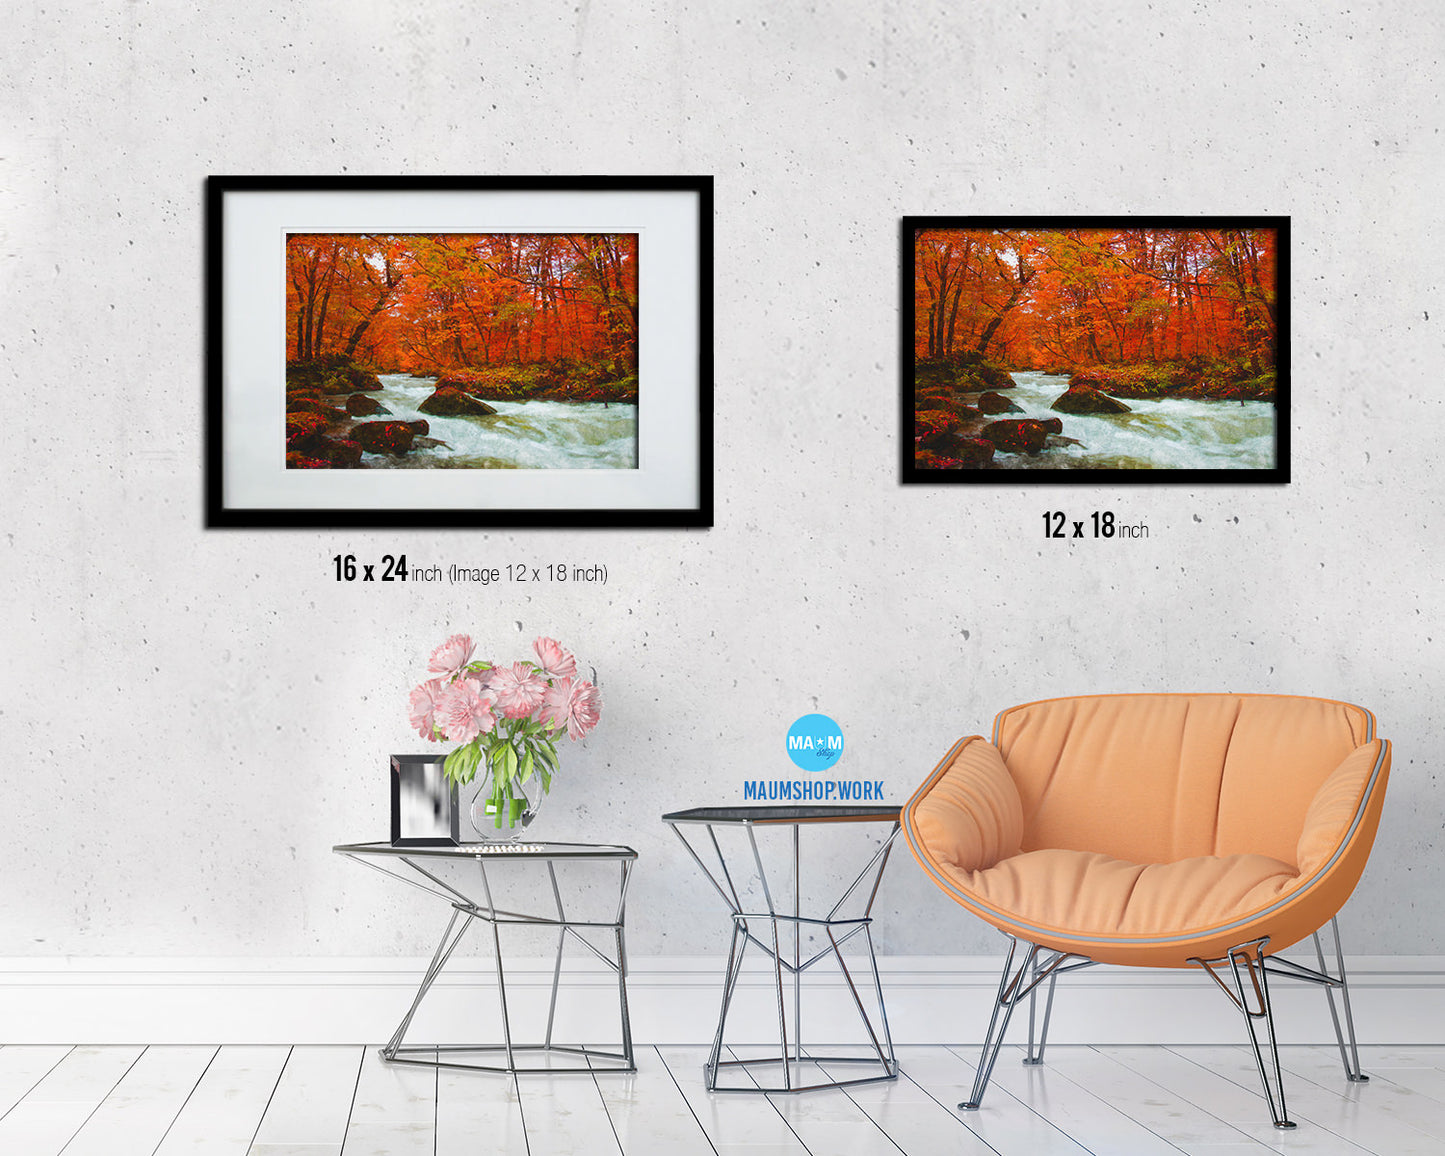 Autumn Strea Landscape Painting Print Art Frame Home Wall Decor Gifts